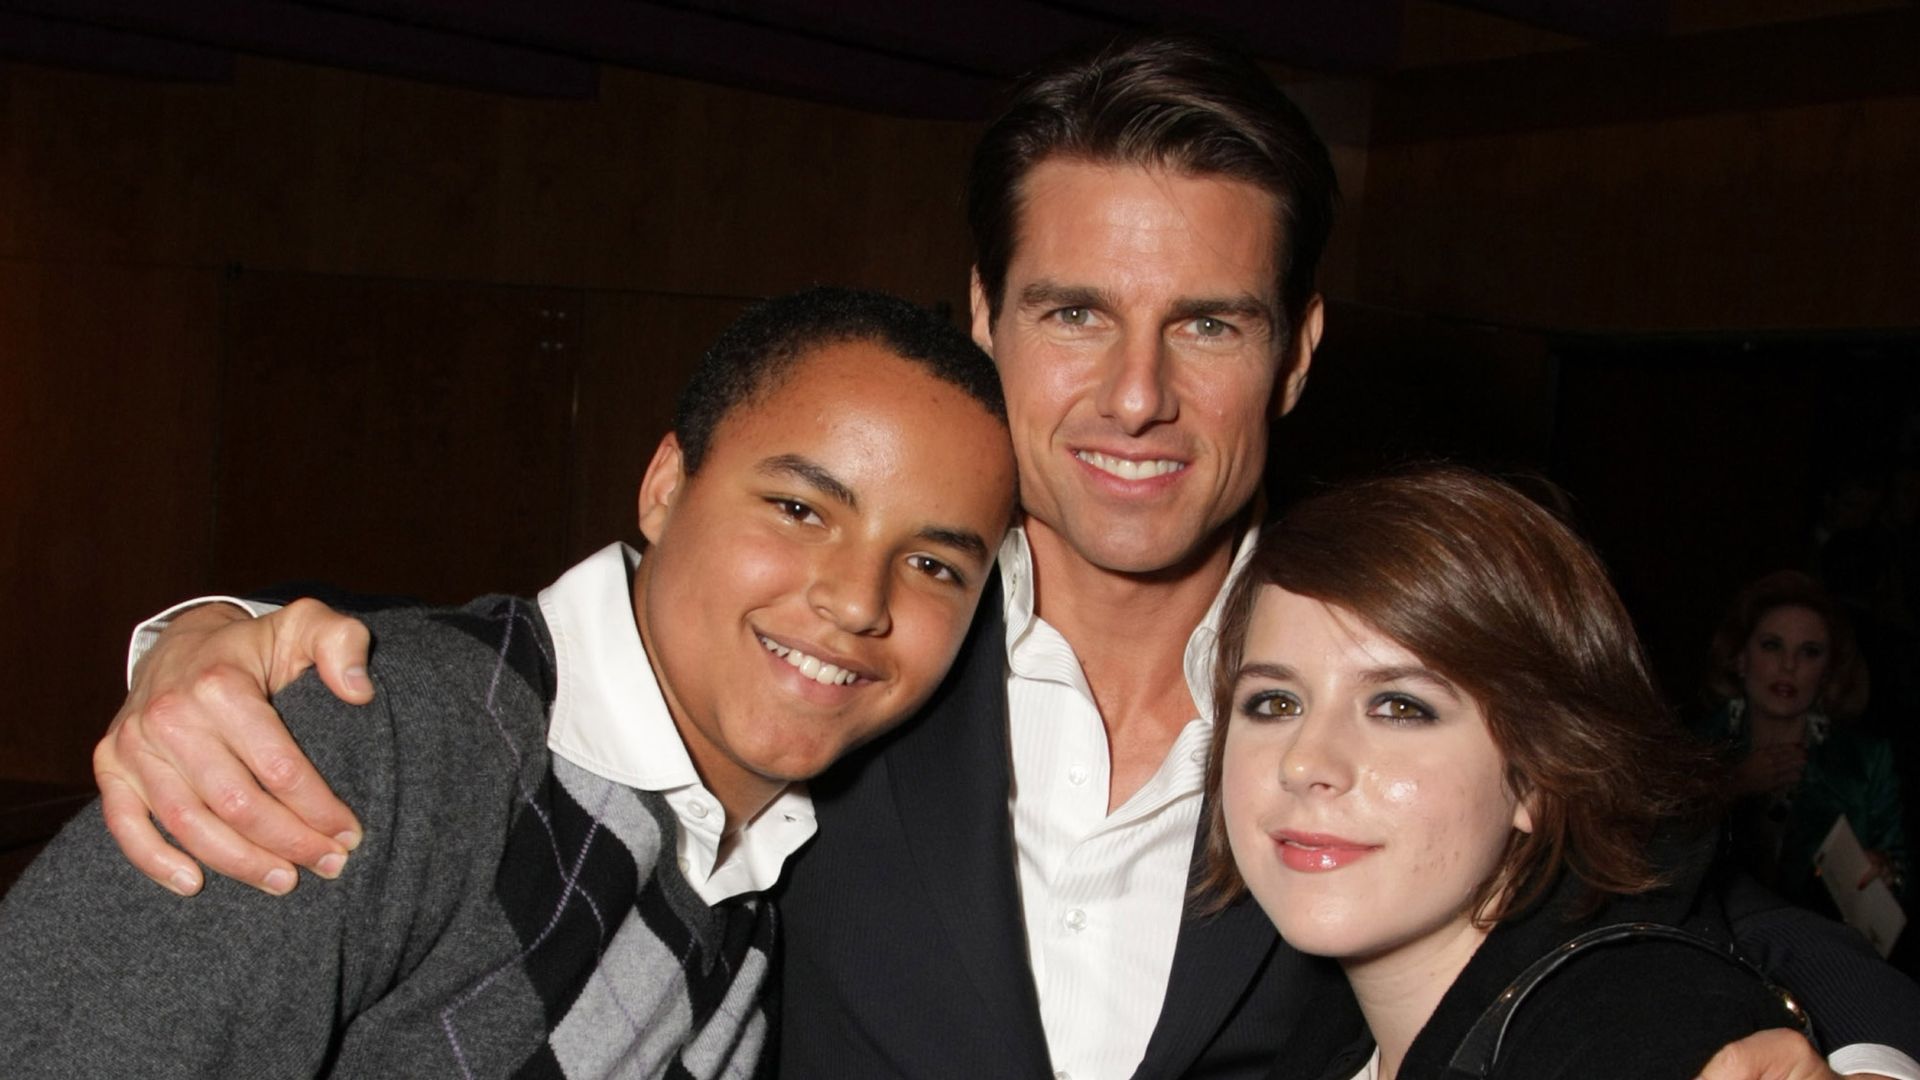 Connor Cruise, Tom Cruise and Isabella Cruise at United Artists Pictures and MGM premiere of 'Valkyrie' on December 18, 2008 at the Directors Guild of America in Los Angeles, California.